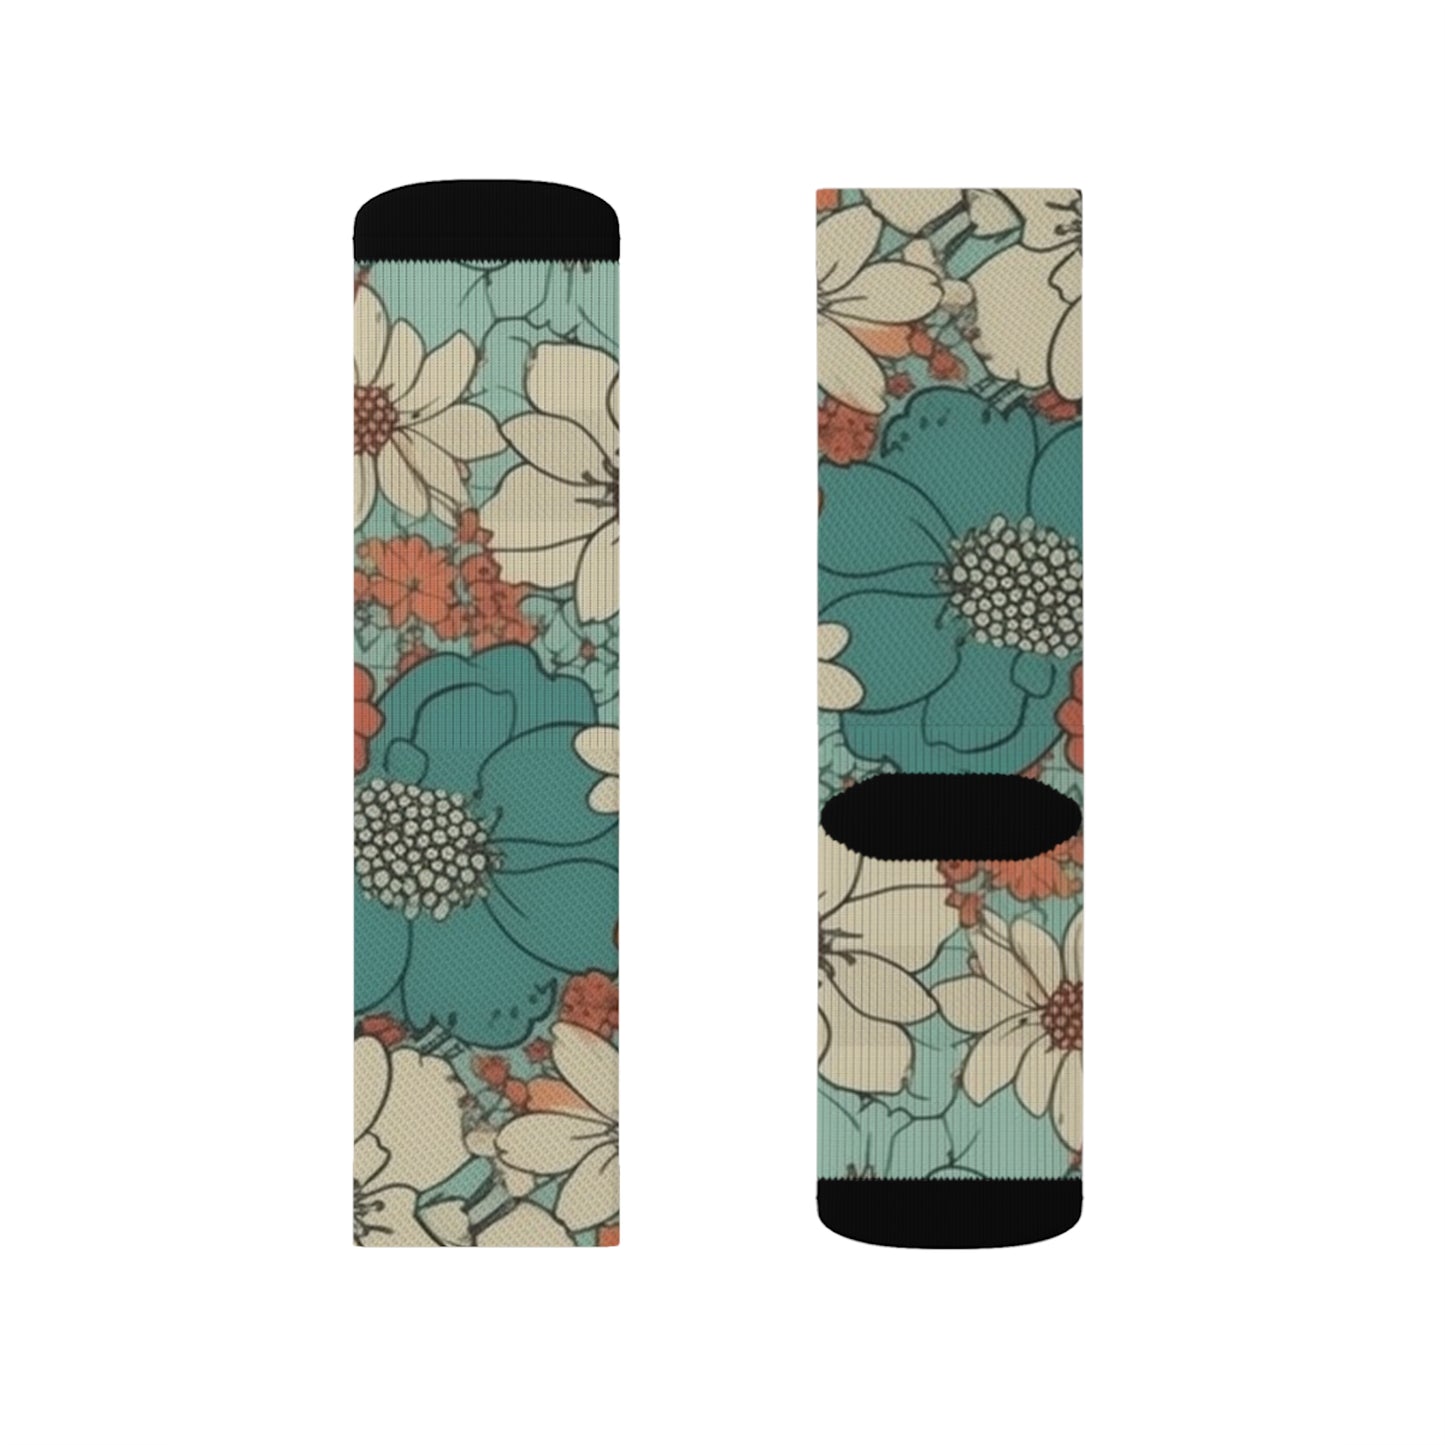 All Over Socks, Abstract Style, Floral design